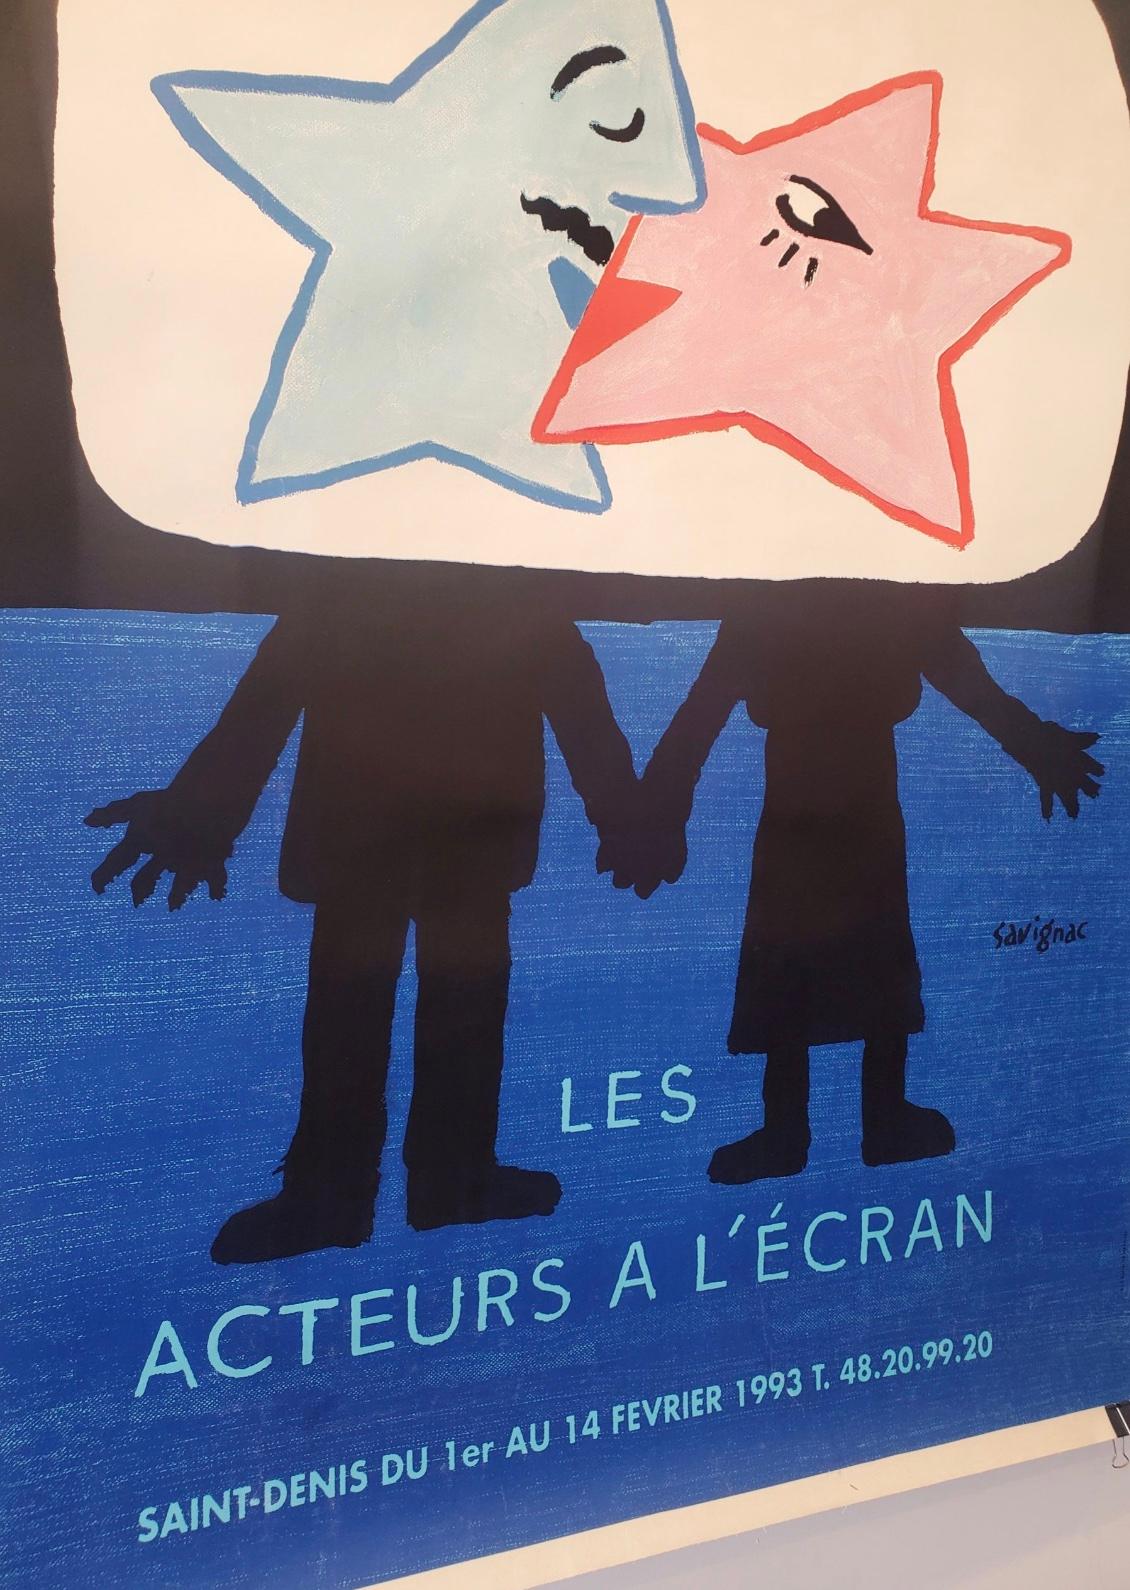 'Les Acteurs A L’ecran' by SAVIGNAC, French Festival of Cinema Poster, 1993

LES ACTEURS A L’ÉCRAN translates to, ‘Actors on screen’. This poster by the famous French artist, Savignac, is advertising a French film festival in Saint-Denis, Paris.